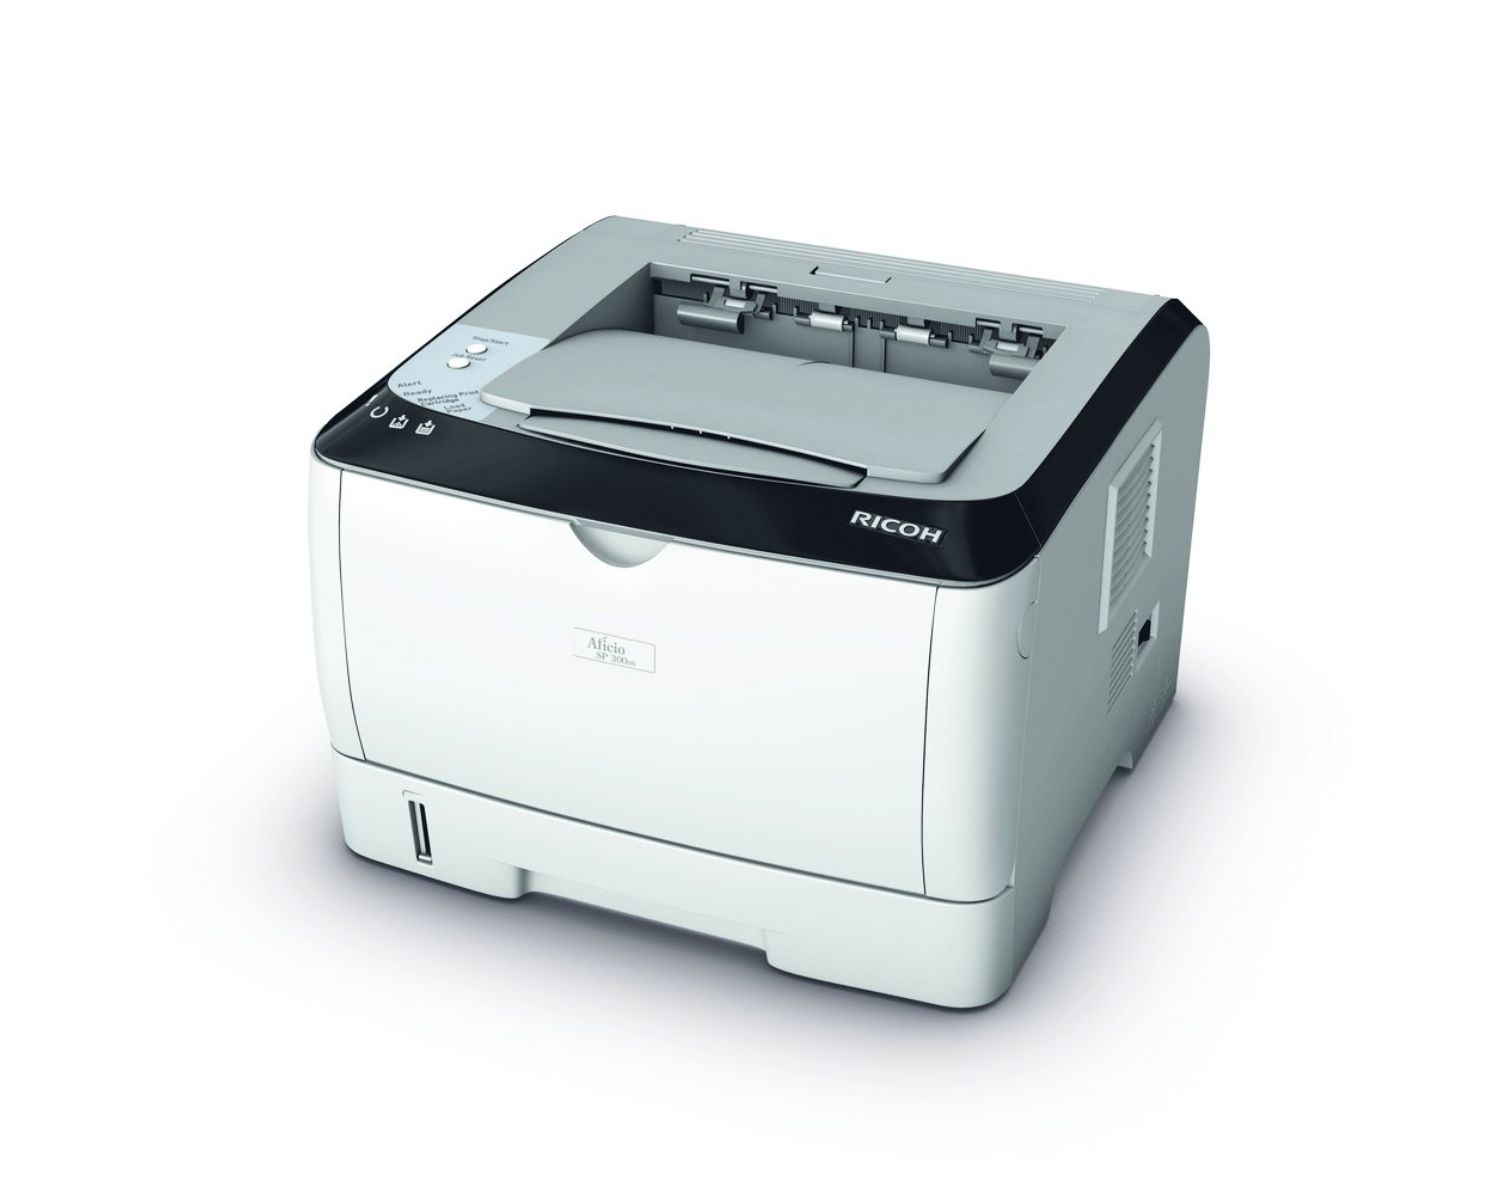 How To Install Ricoh Printer Driver